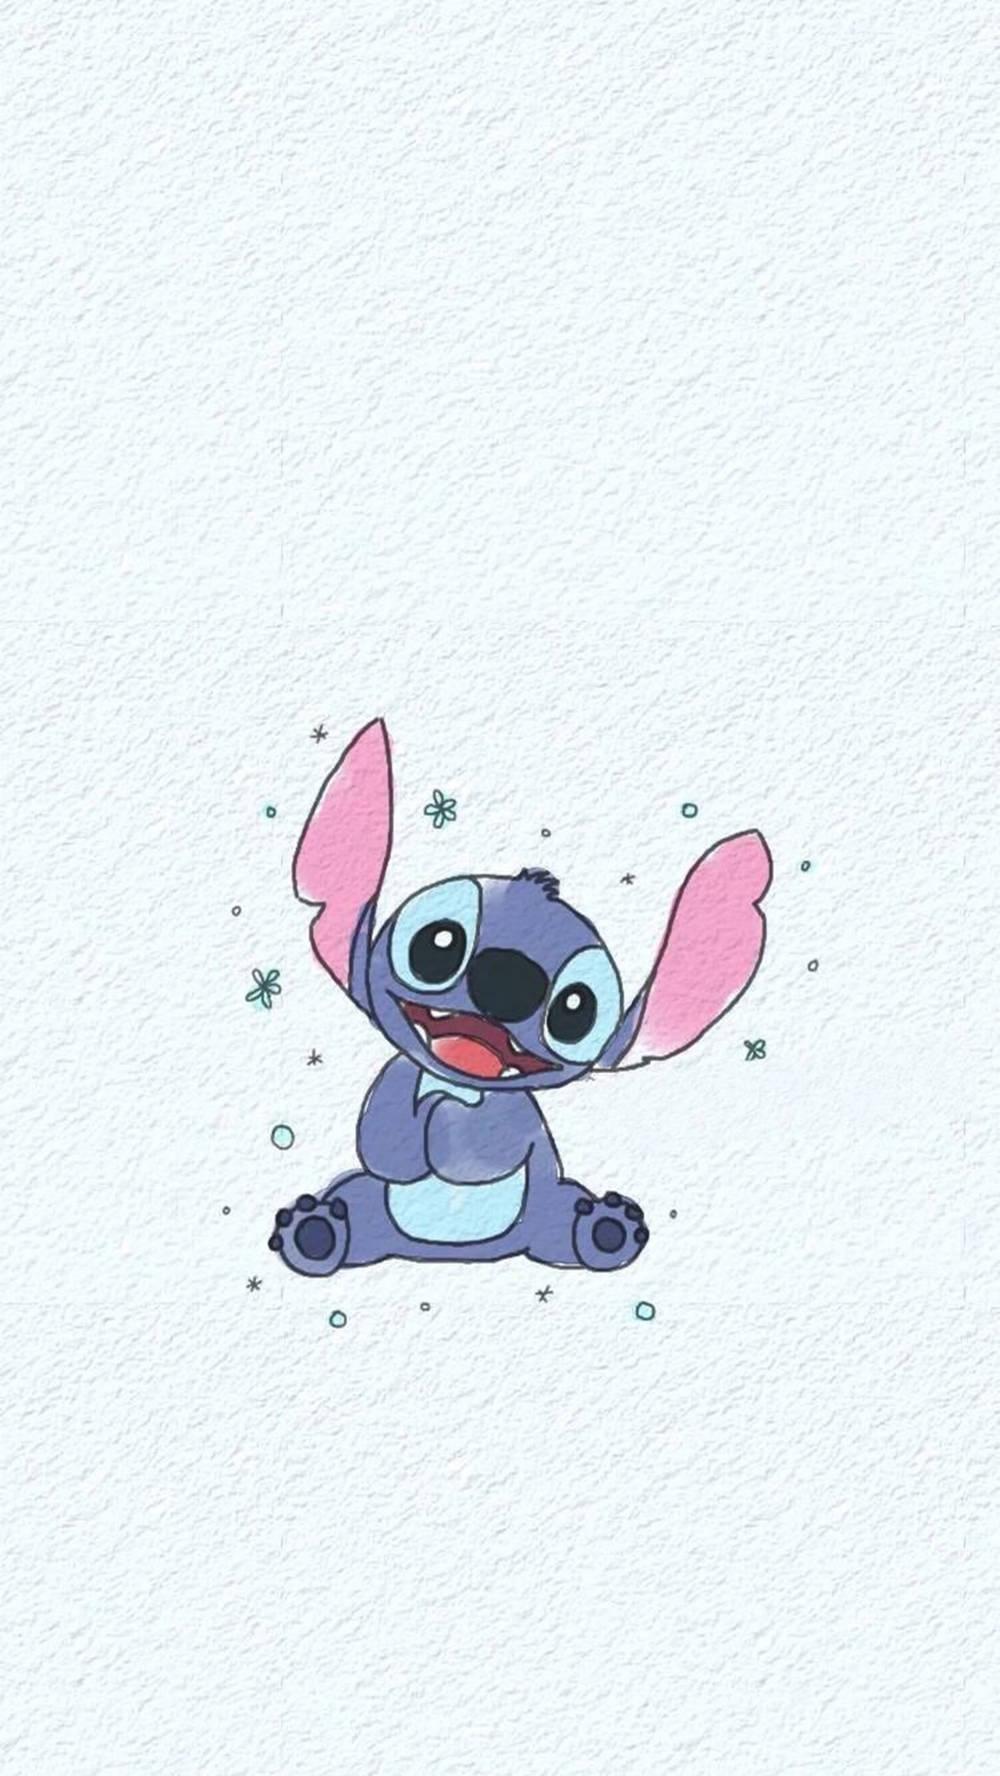 Download Cute Stitch Happy Smile IPhone Wallpaper